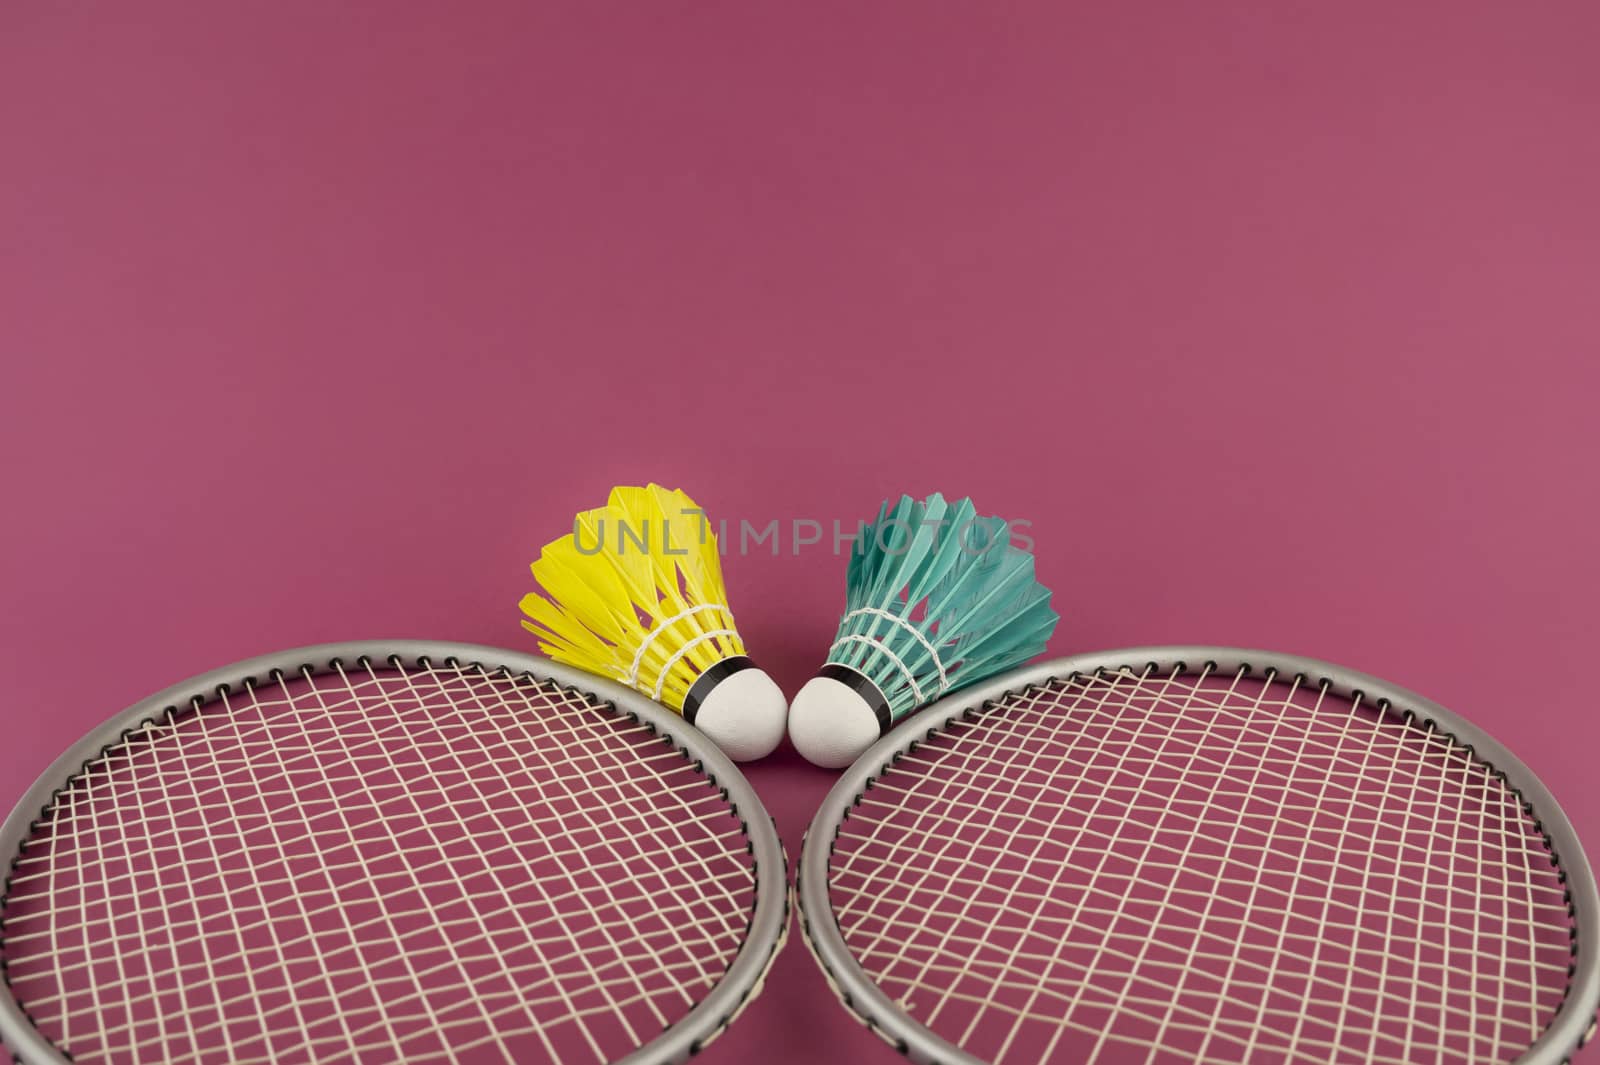 Badminton rackets and colorful feathered shuttlecocks in blue and yellow on a pink background